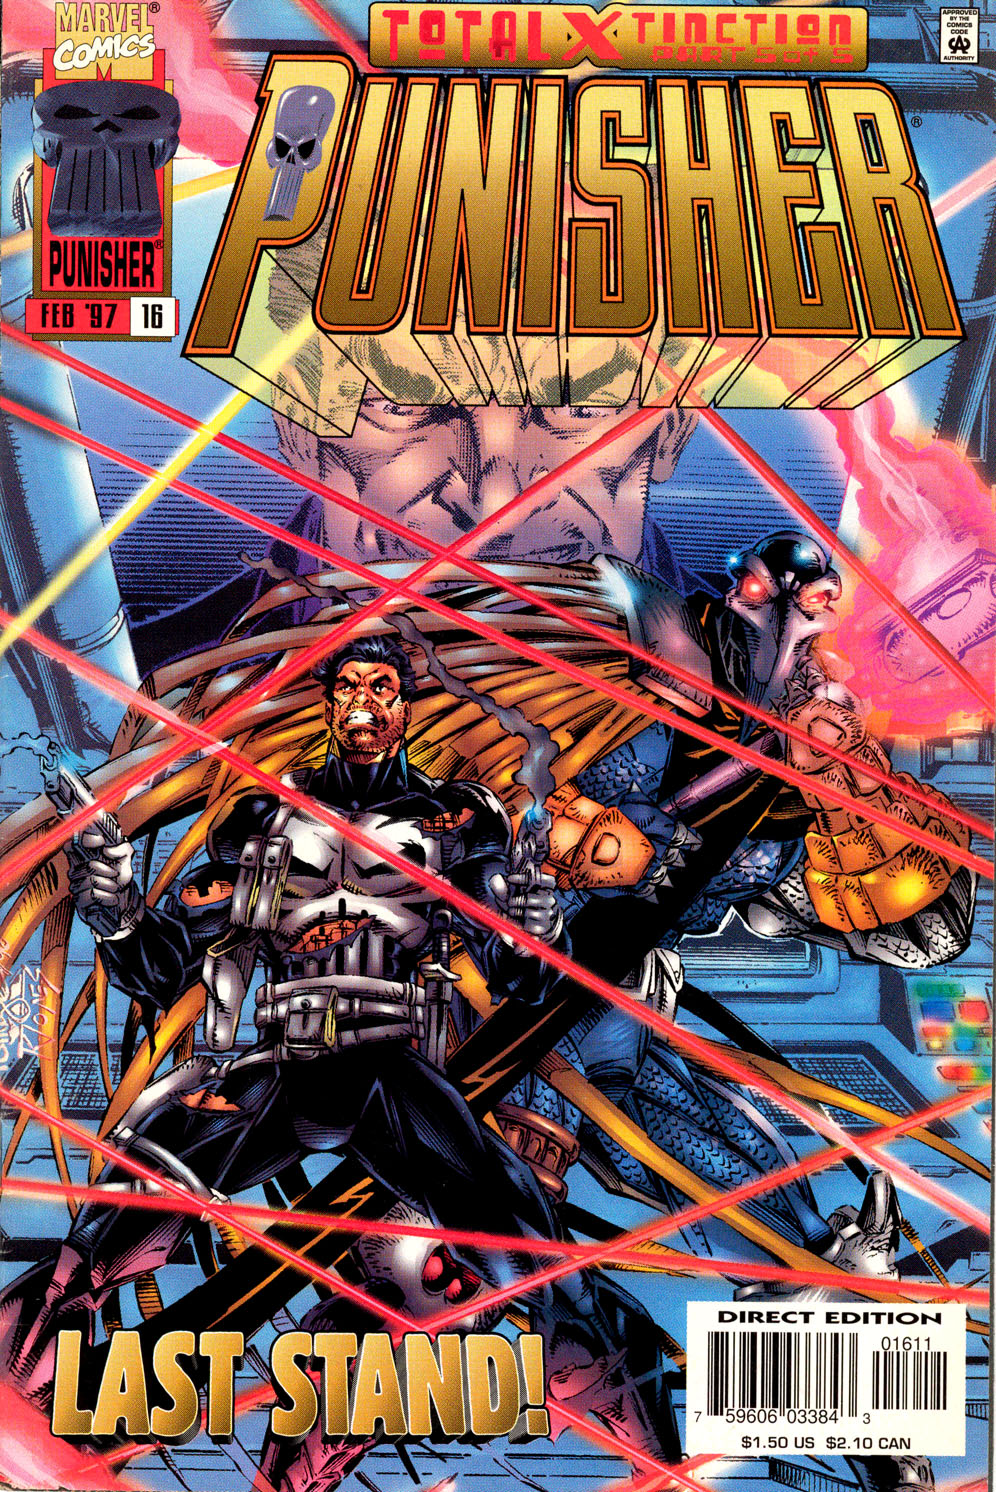 Punisher (1995) issue 16 - Total X-tinction - Page 1